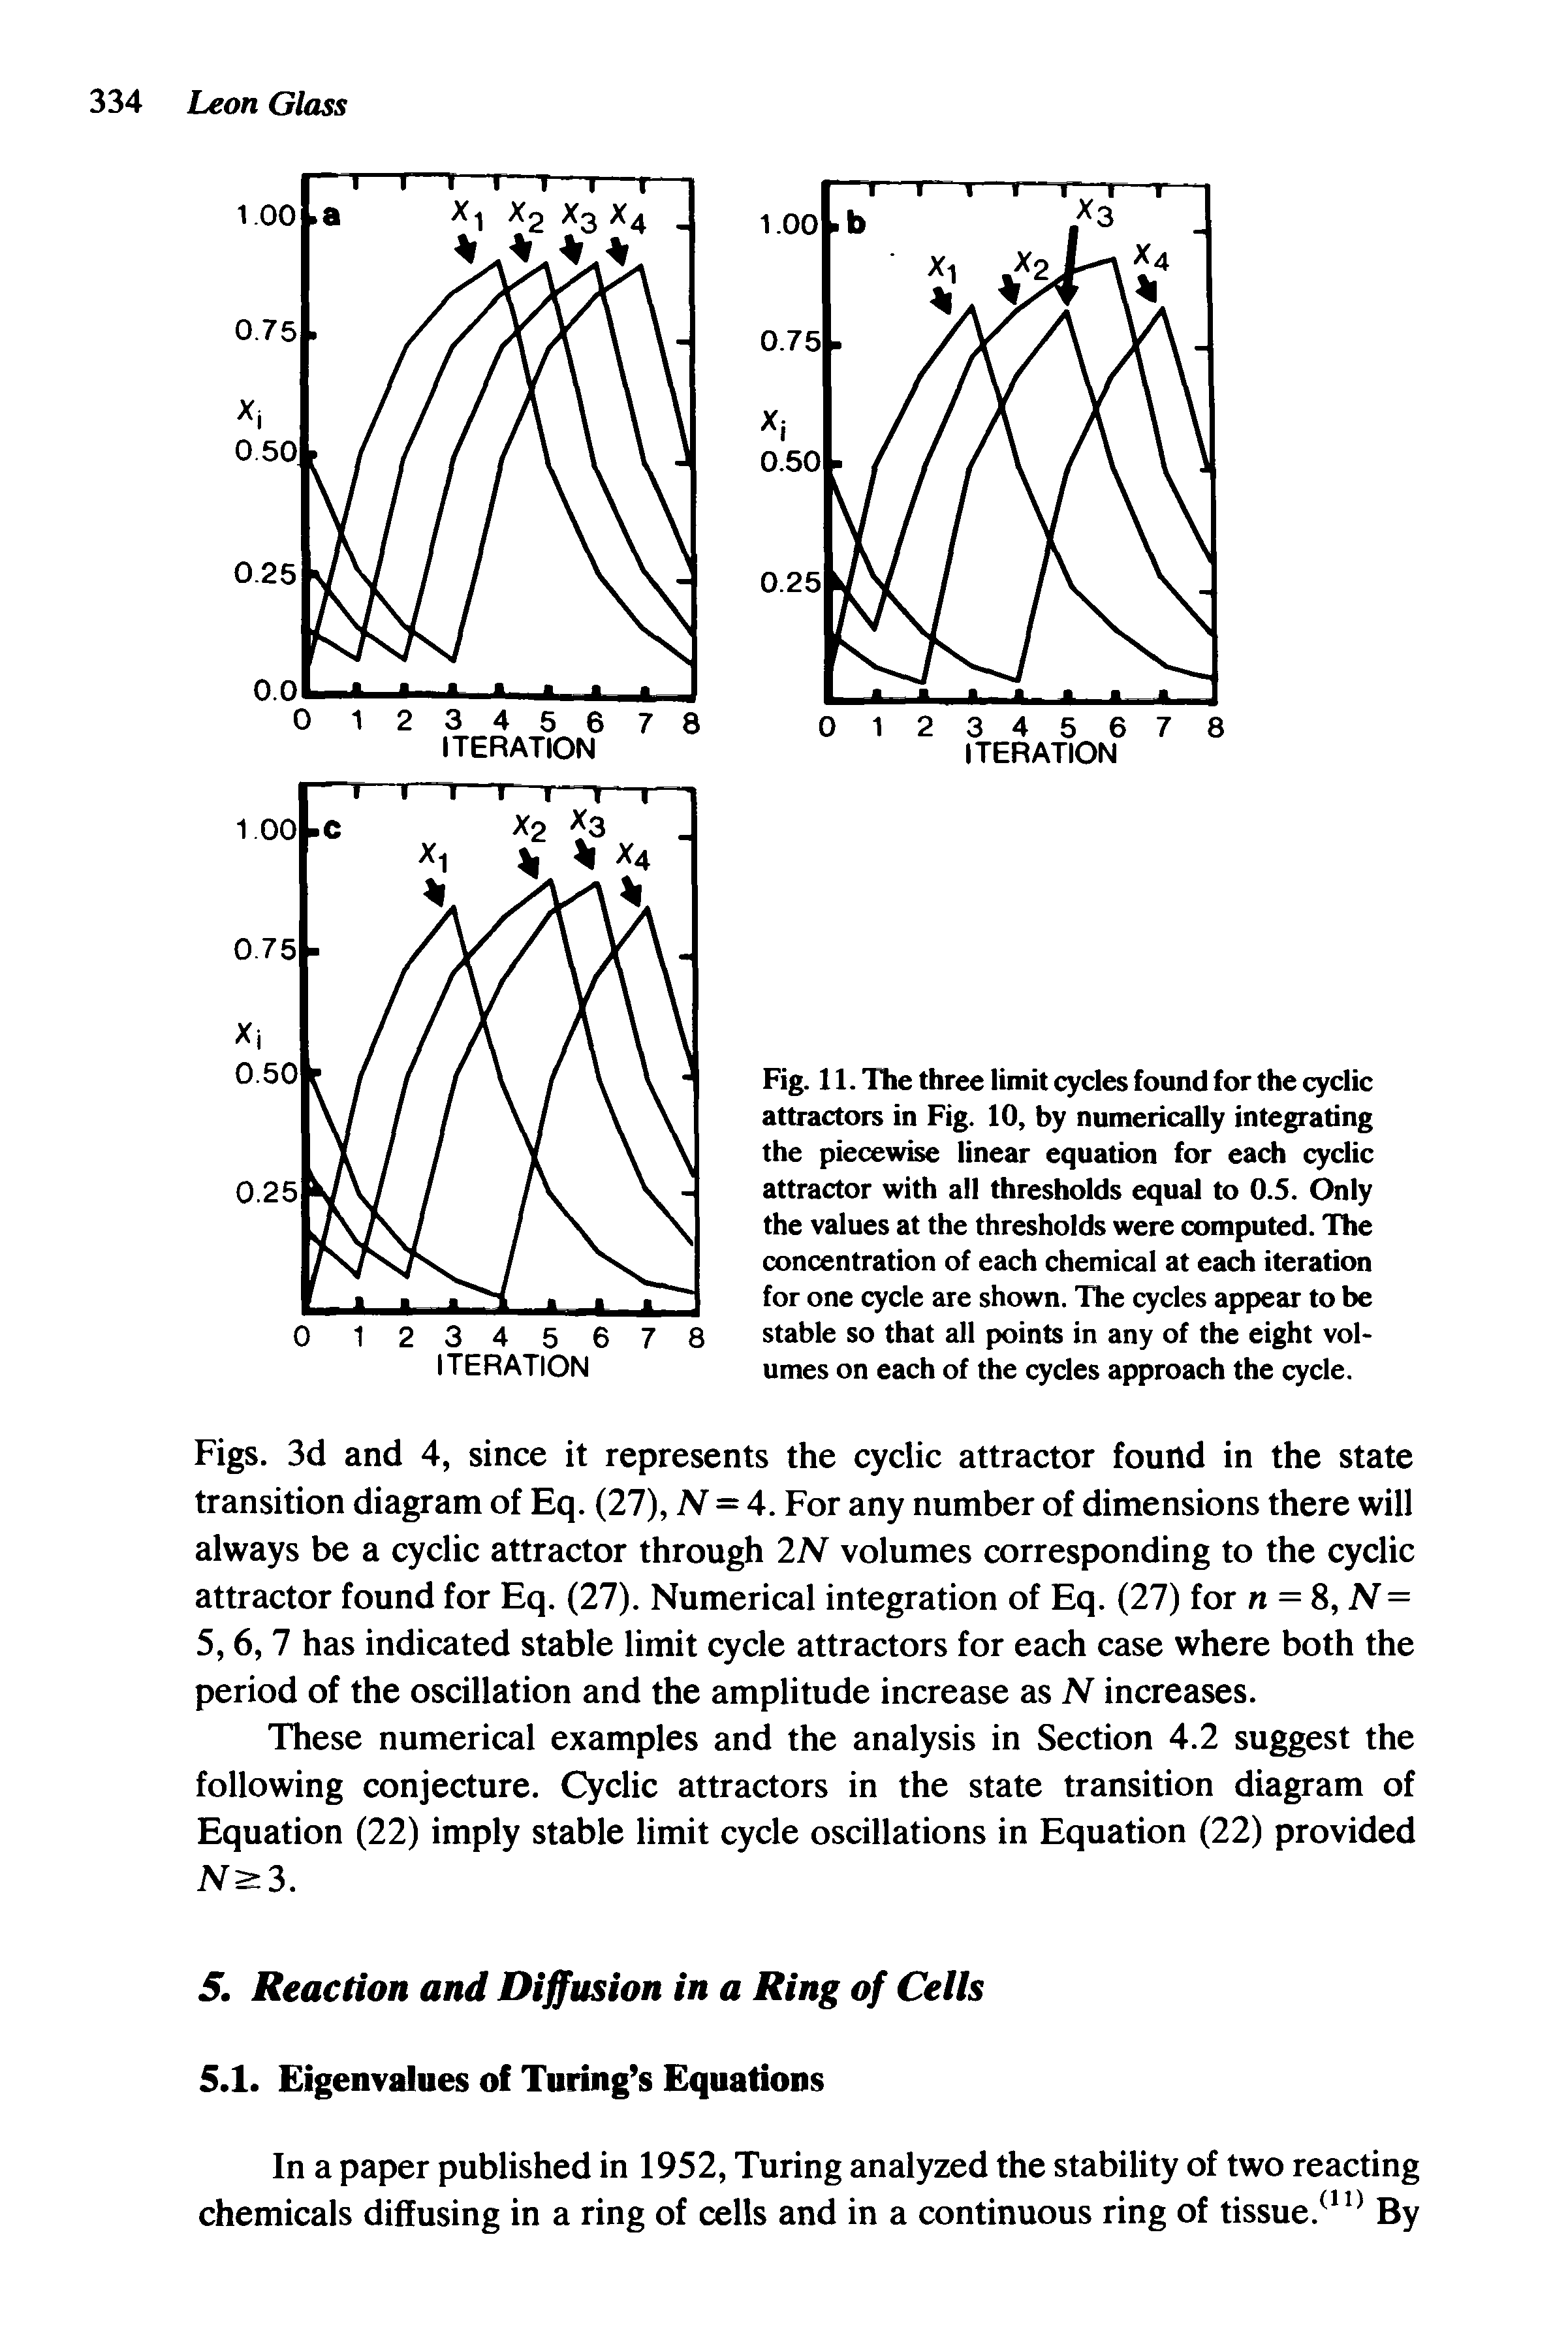 Fig. 11. The three limit cycles found for the cyclic attractors in Fig. 10, by numerically integrating the piecewise linear equation for each cyclic attractor with all thresholds equal to 0.5. Only the values at the thresholds were computed. The concentration of each chemical at each iteration for one cycle are shown. Tlie cycles appear to be stable so that all points in any of the eight volumes on each of the cycles approach the cycle.